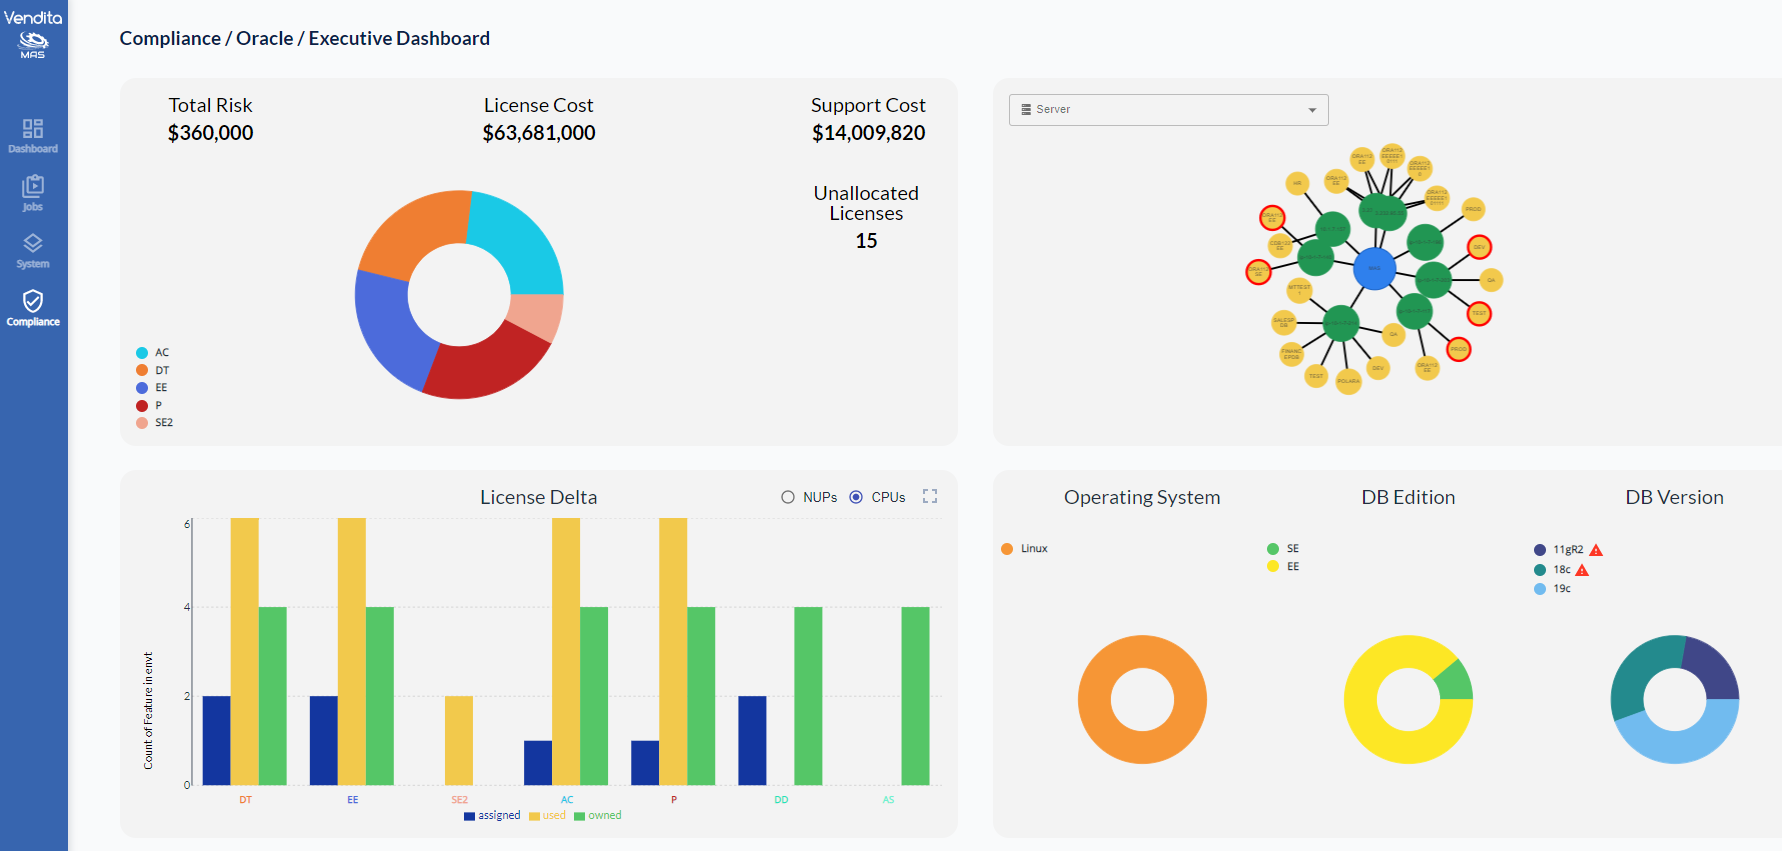 orcl_comp_dashboard_2